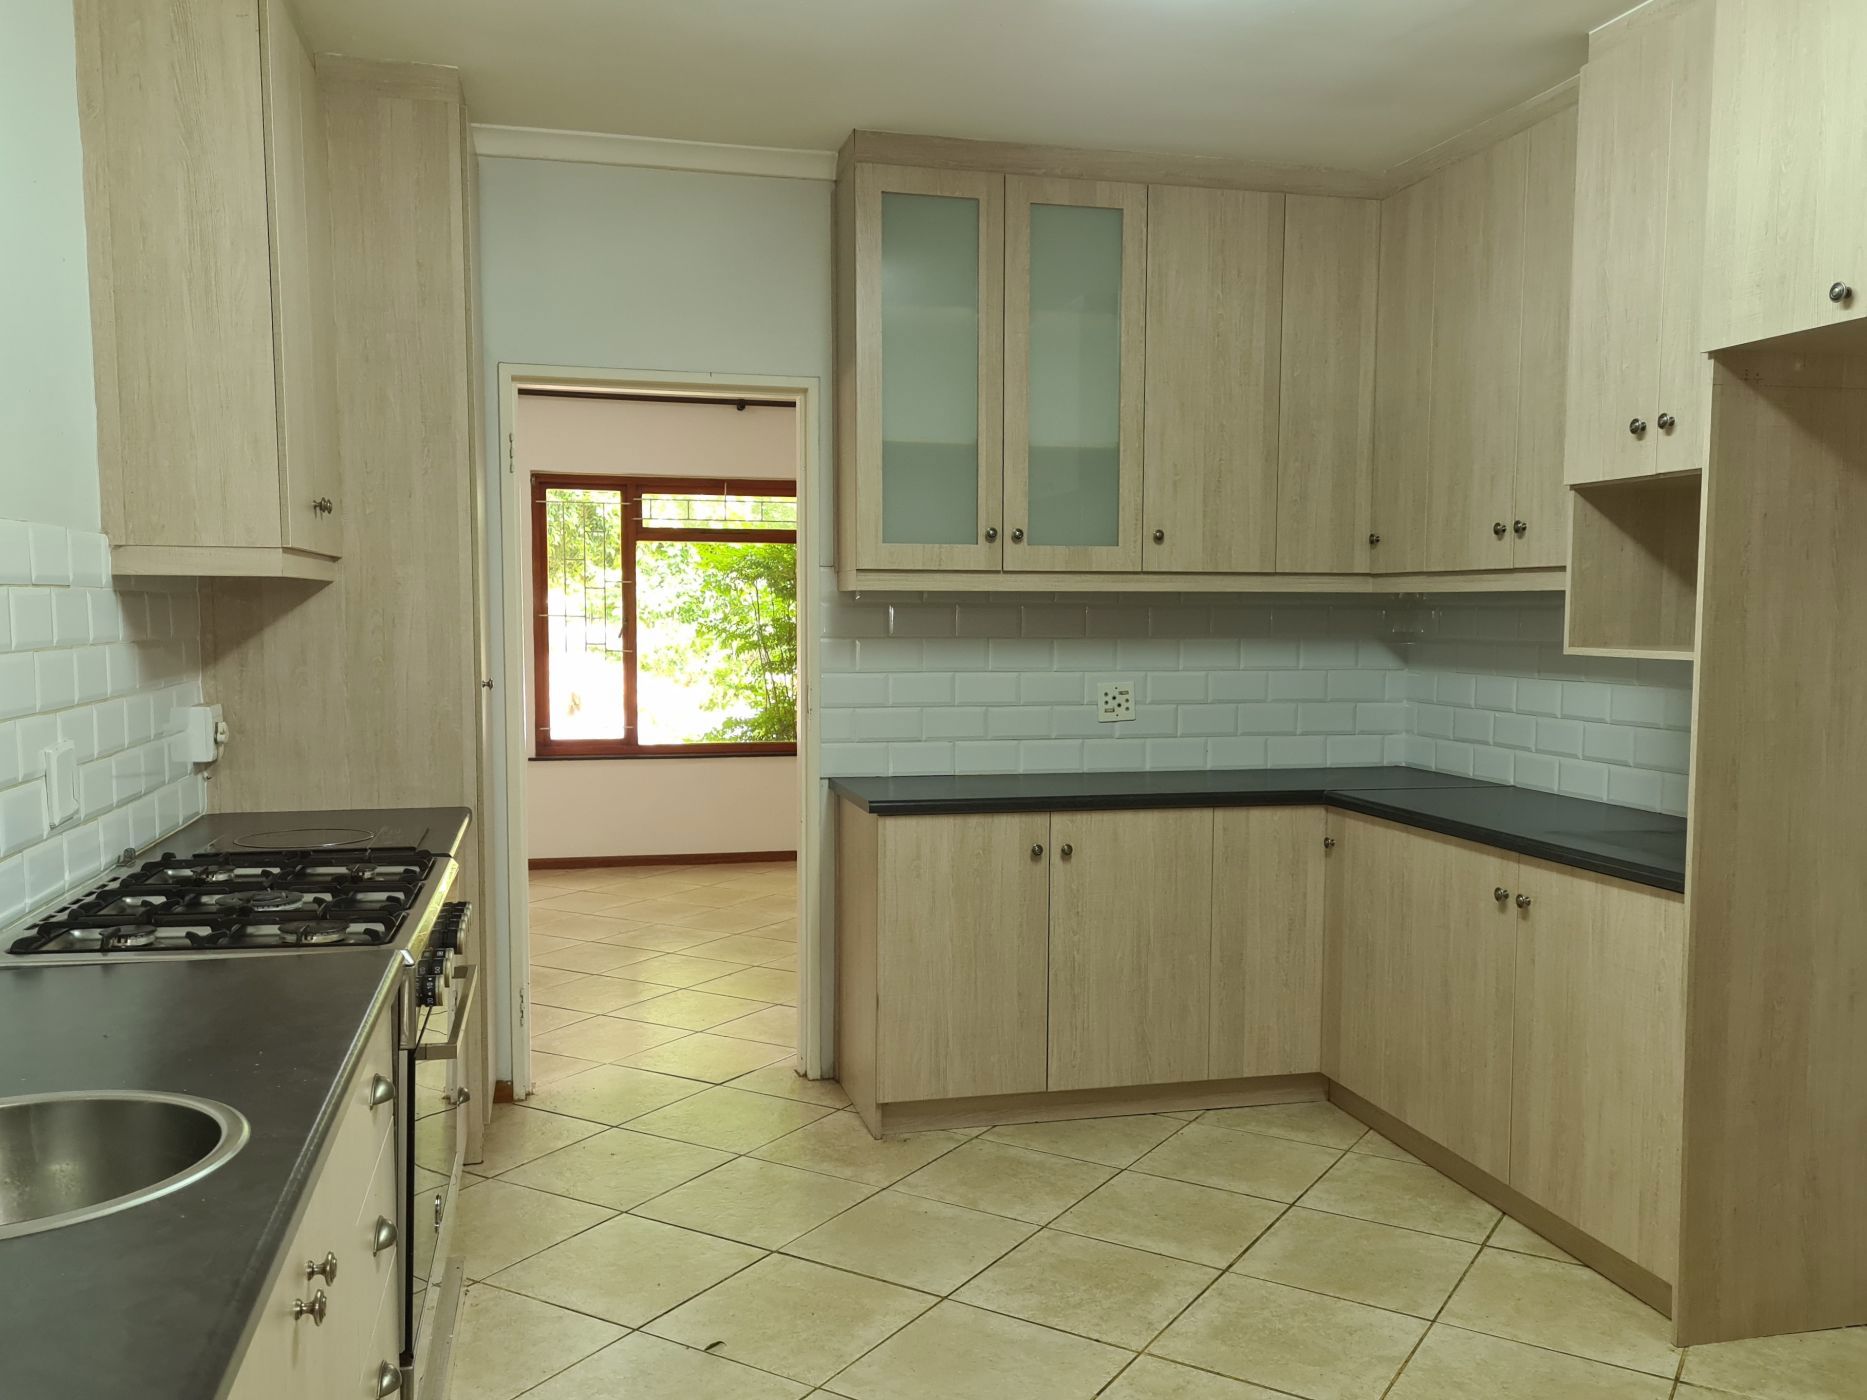 3 bedroom house to rent in Panorama (Malmesbury)